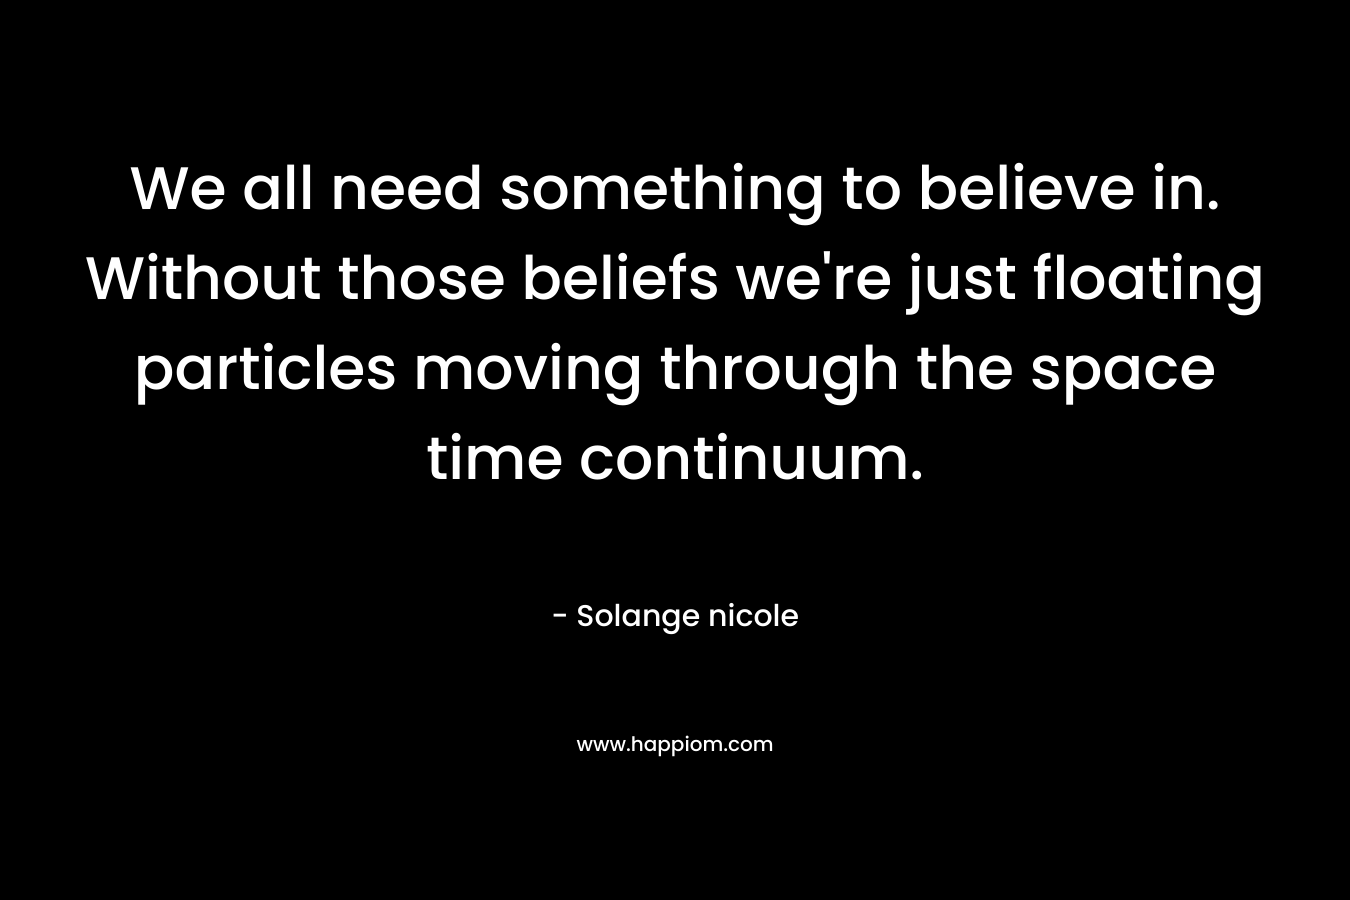 We all need something to believe in. Without those beliefs we're just floating particles moving through the space time continuum.